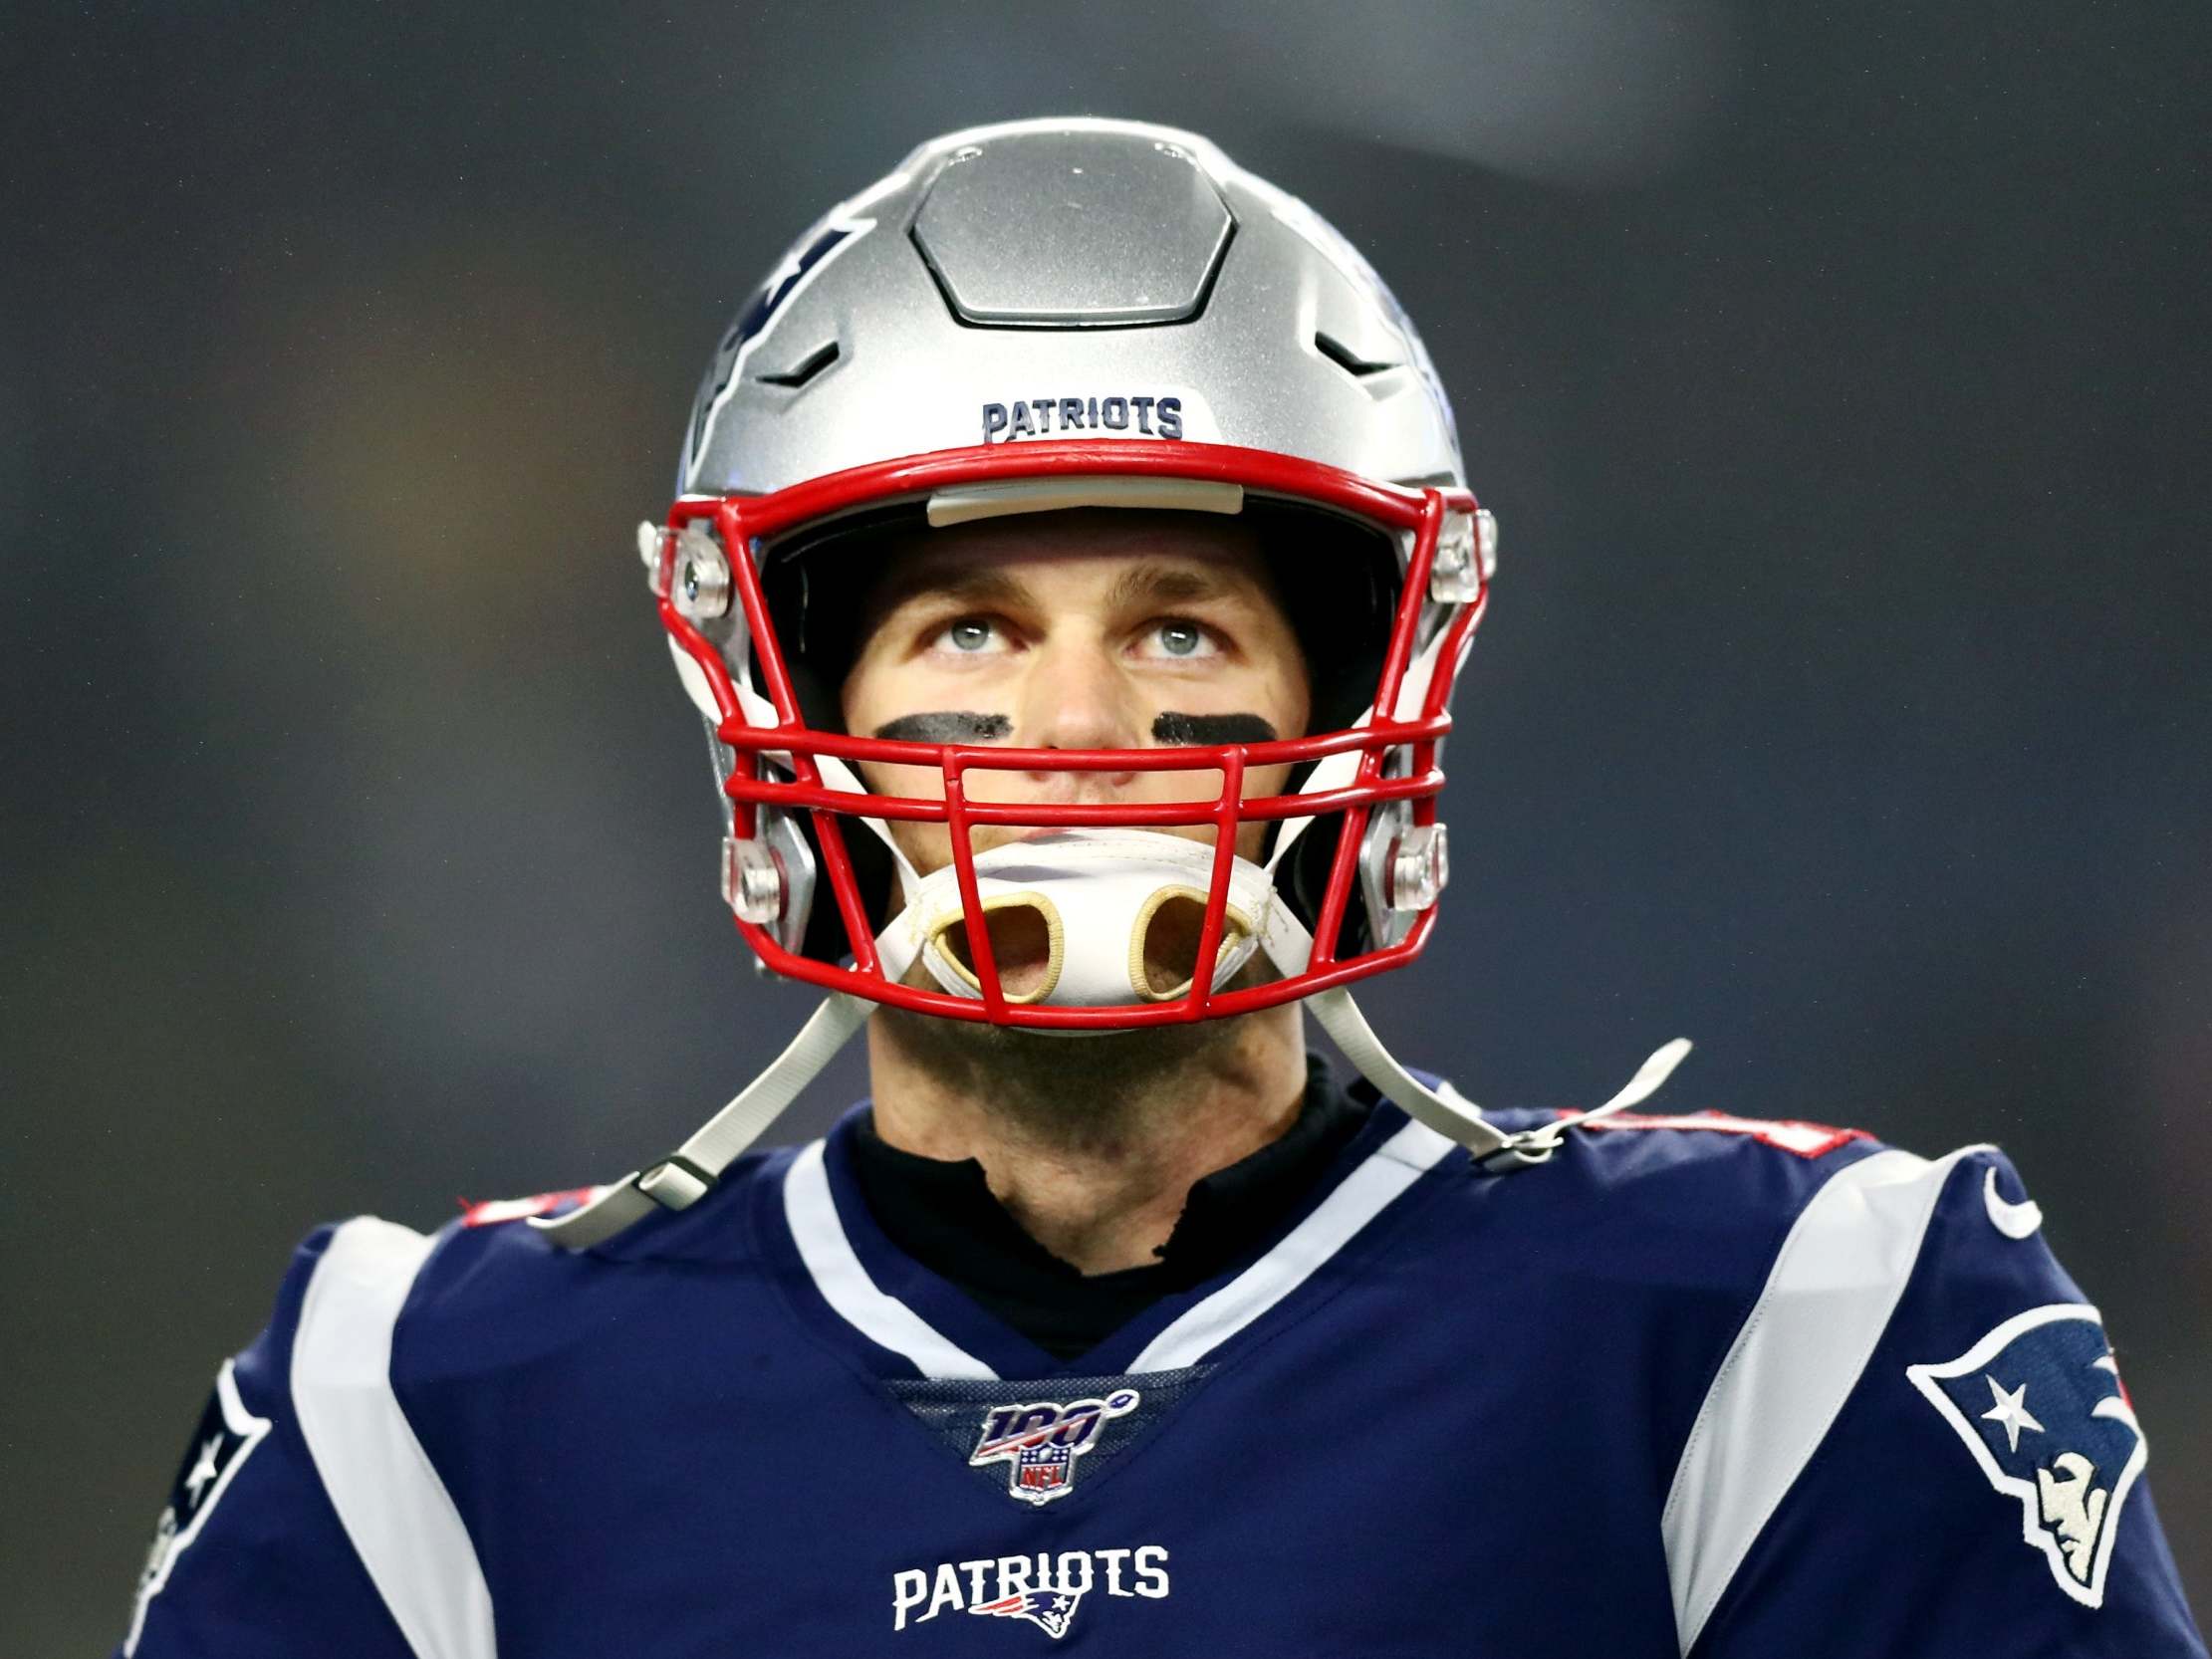 Brady has ruled out retiring from the NFL this offseason